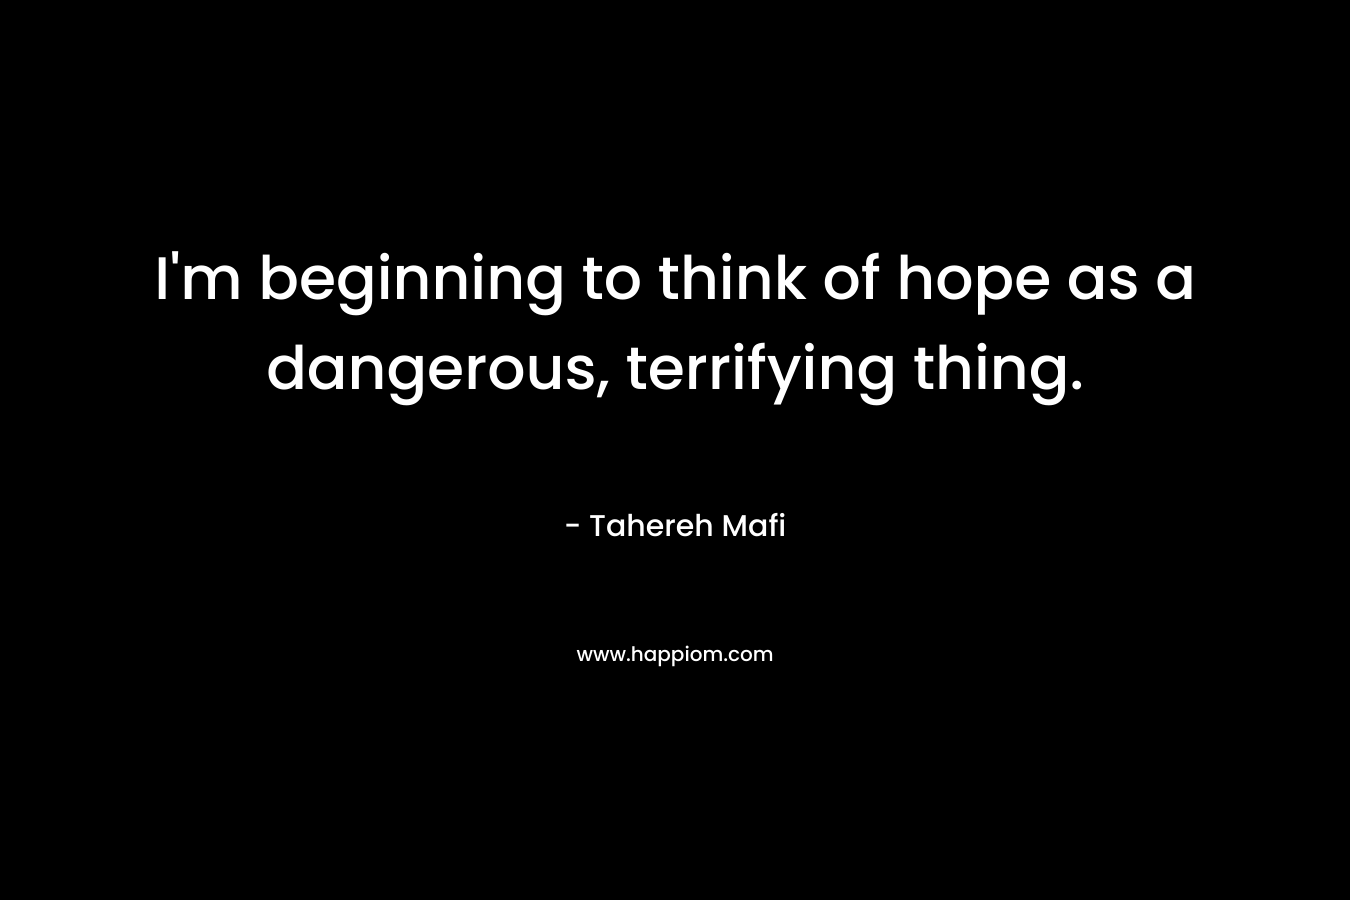 I’m beginning to think of hope as a dangerous, terrifying thing. – Tahereh Mafi